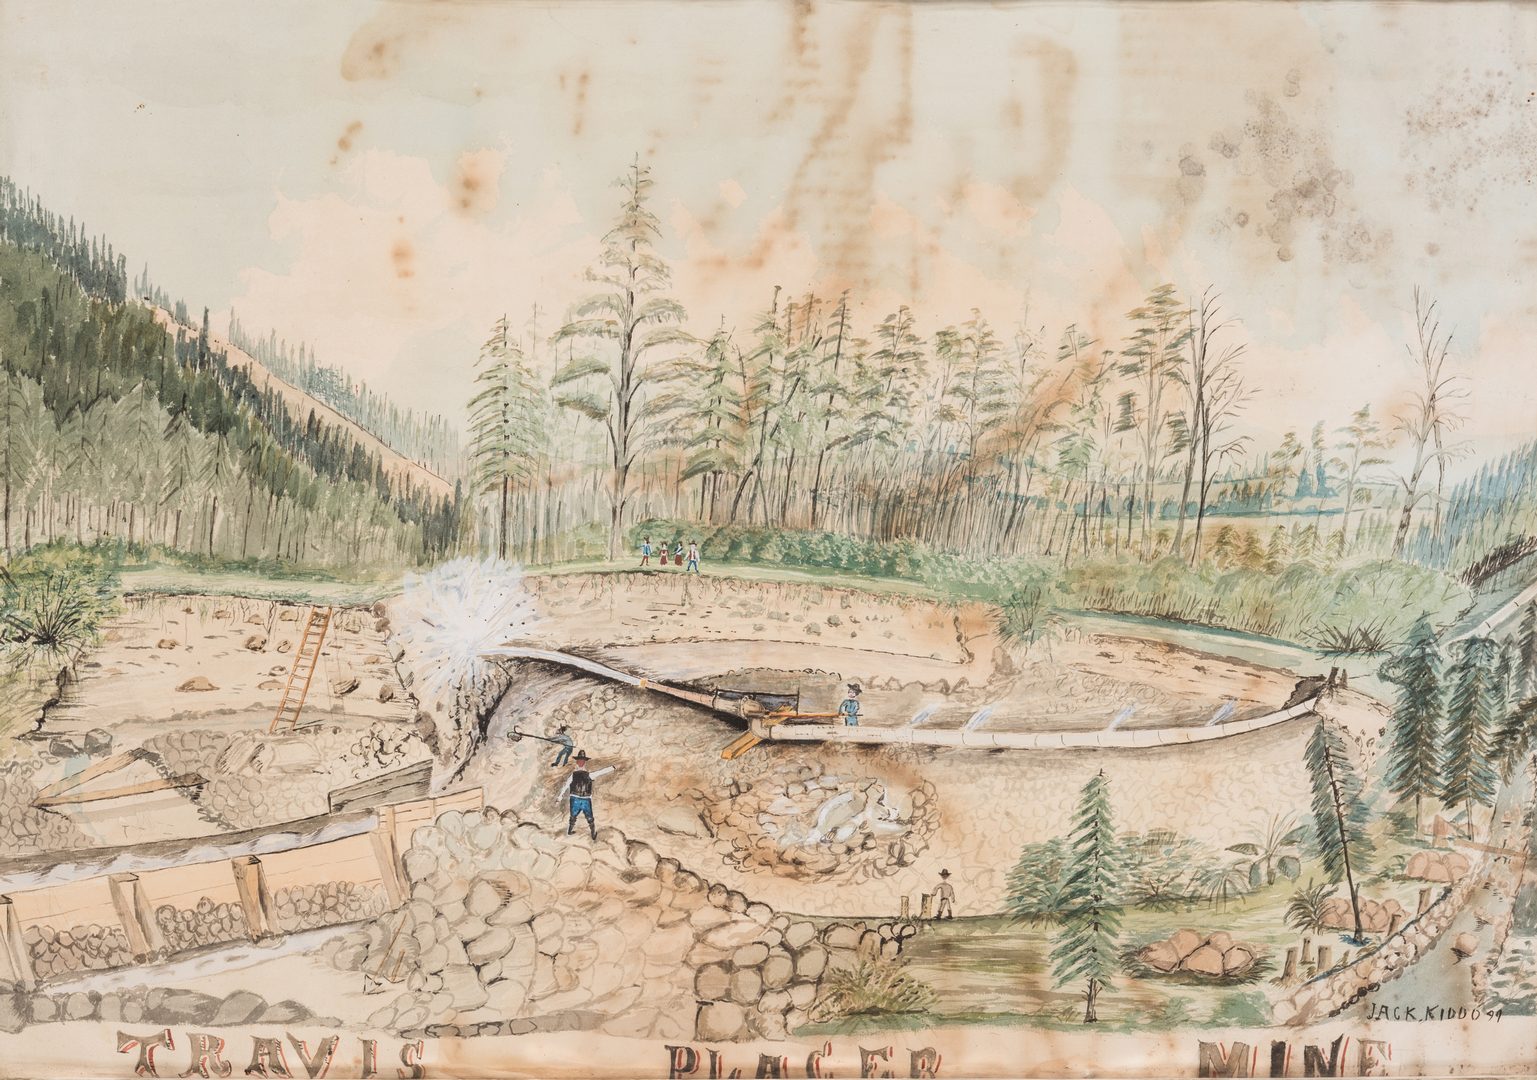 Lot 411: Pair of Historical Gold Mine Watercolors